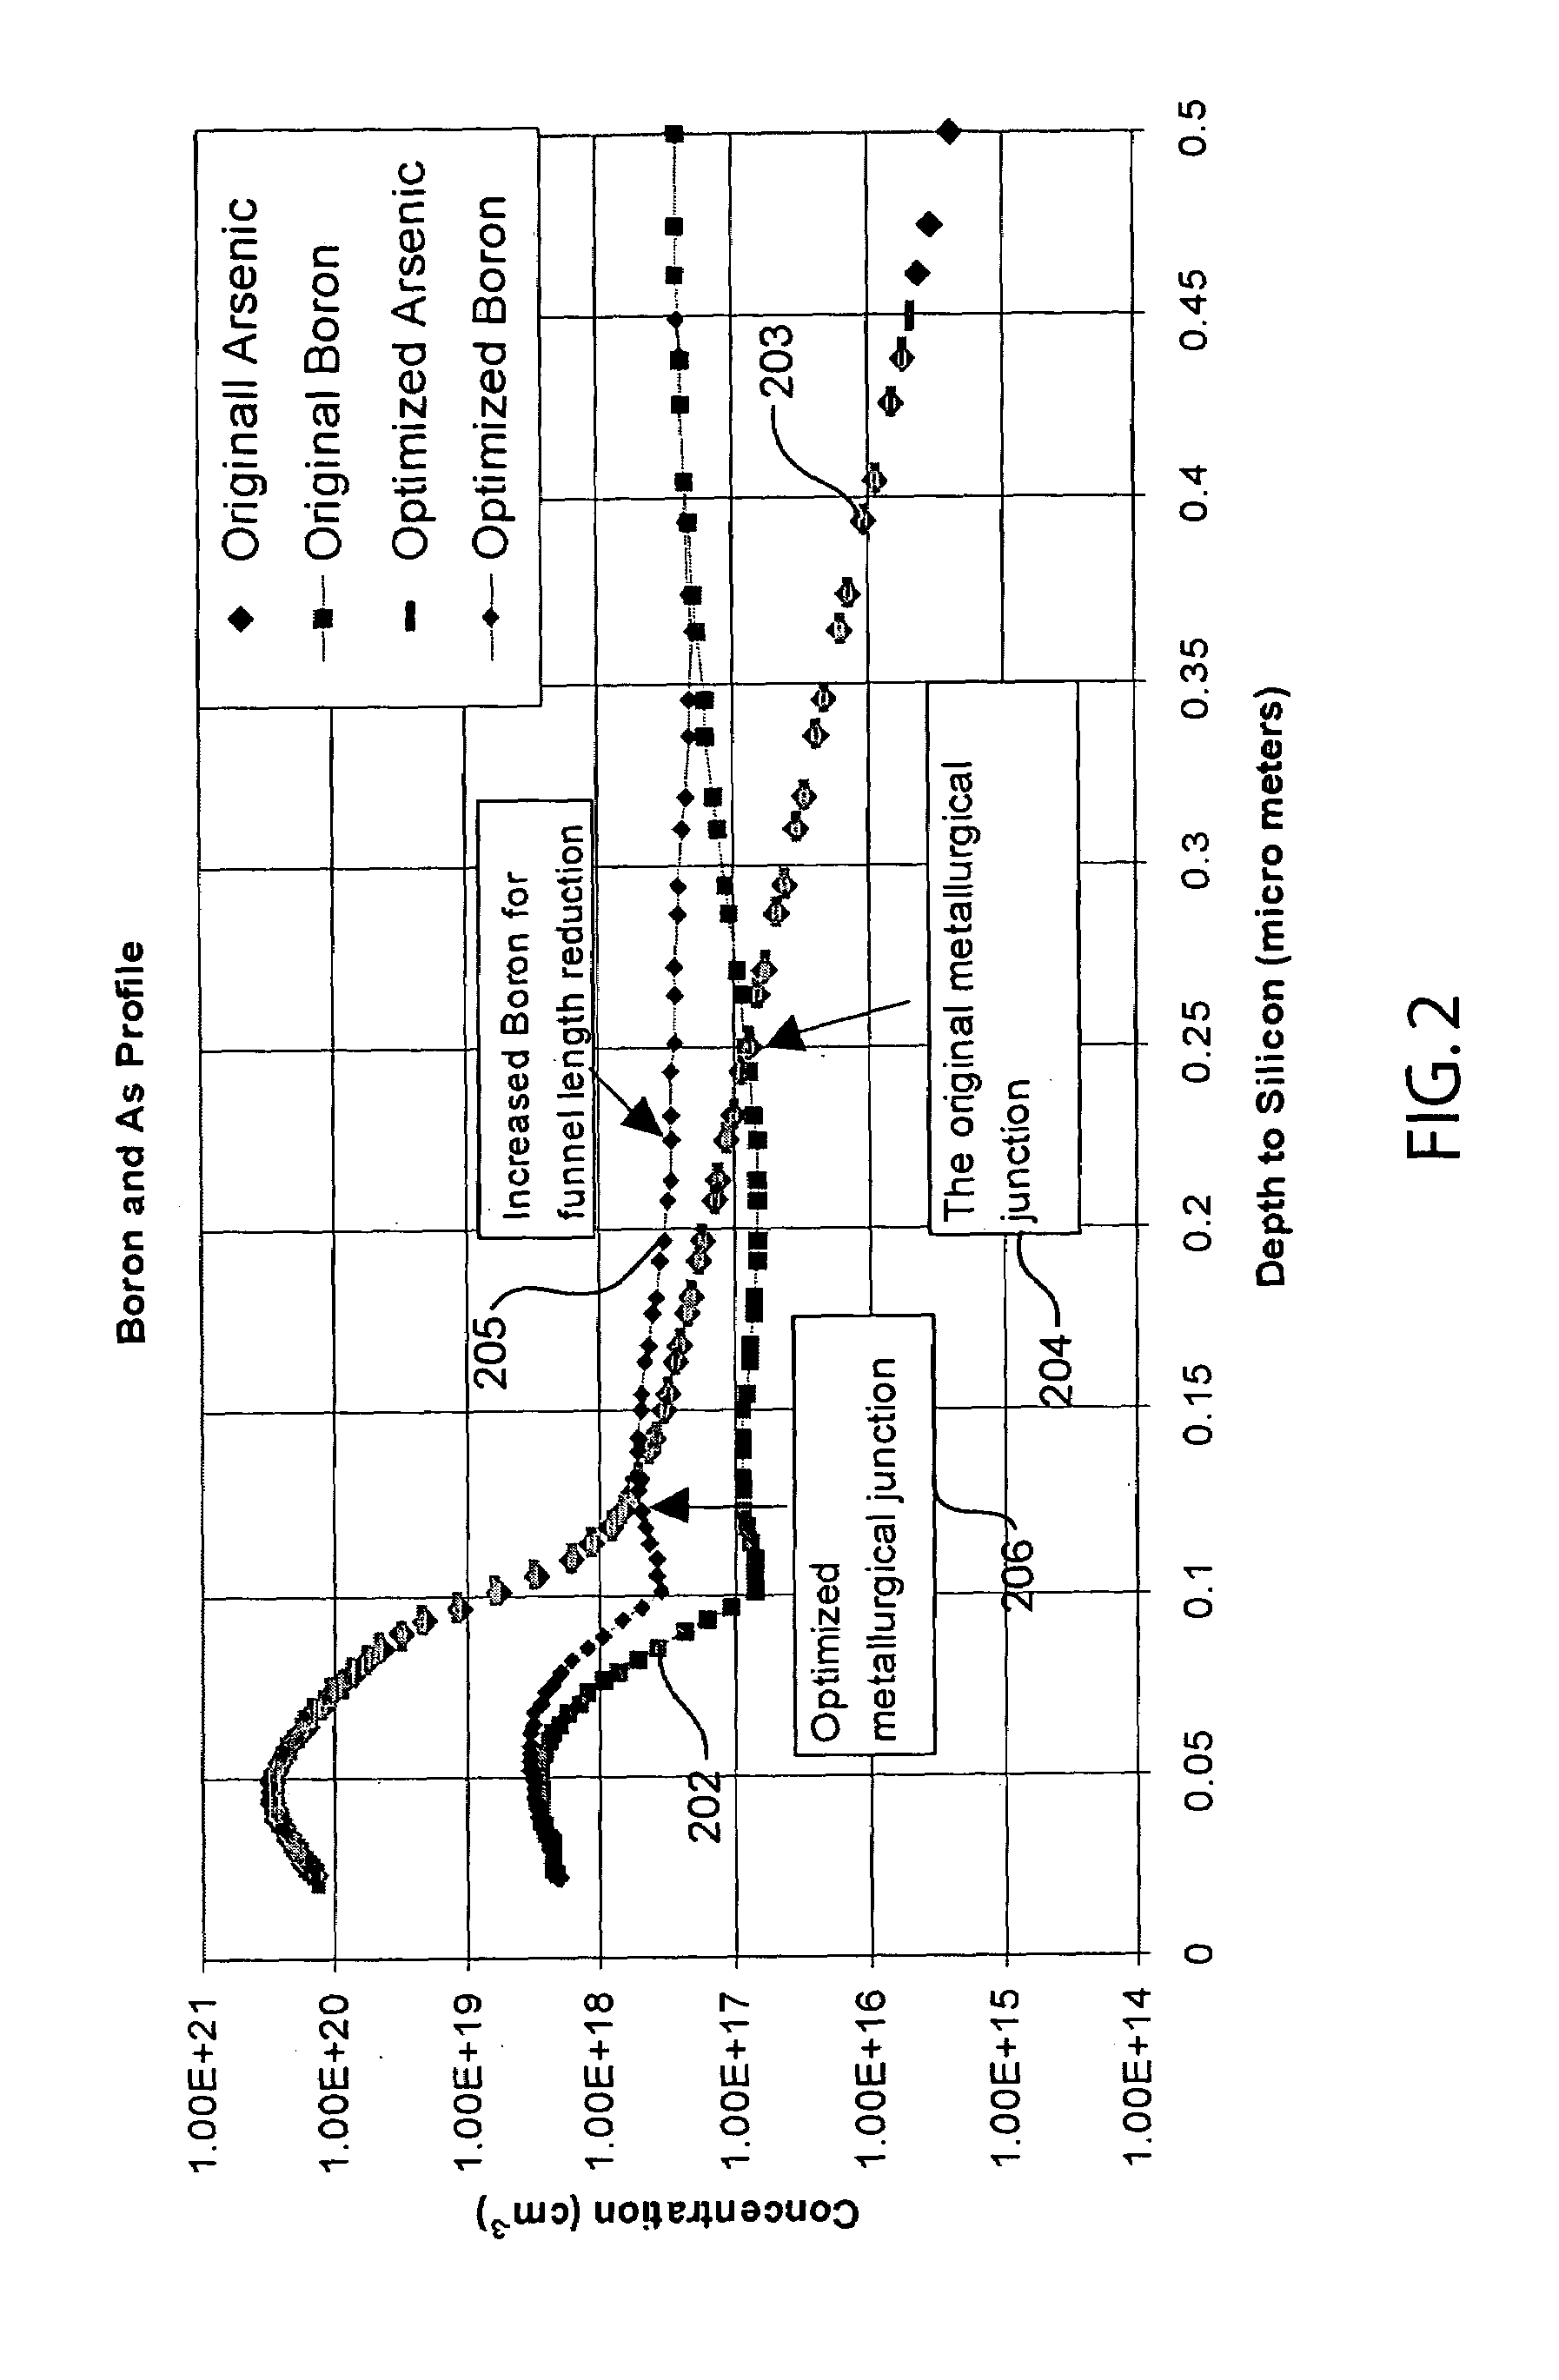 Method for reducing soft error rates of memory cells